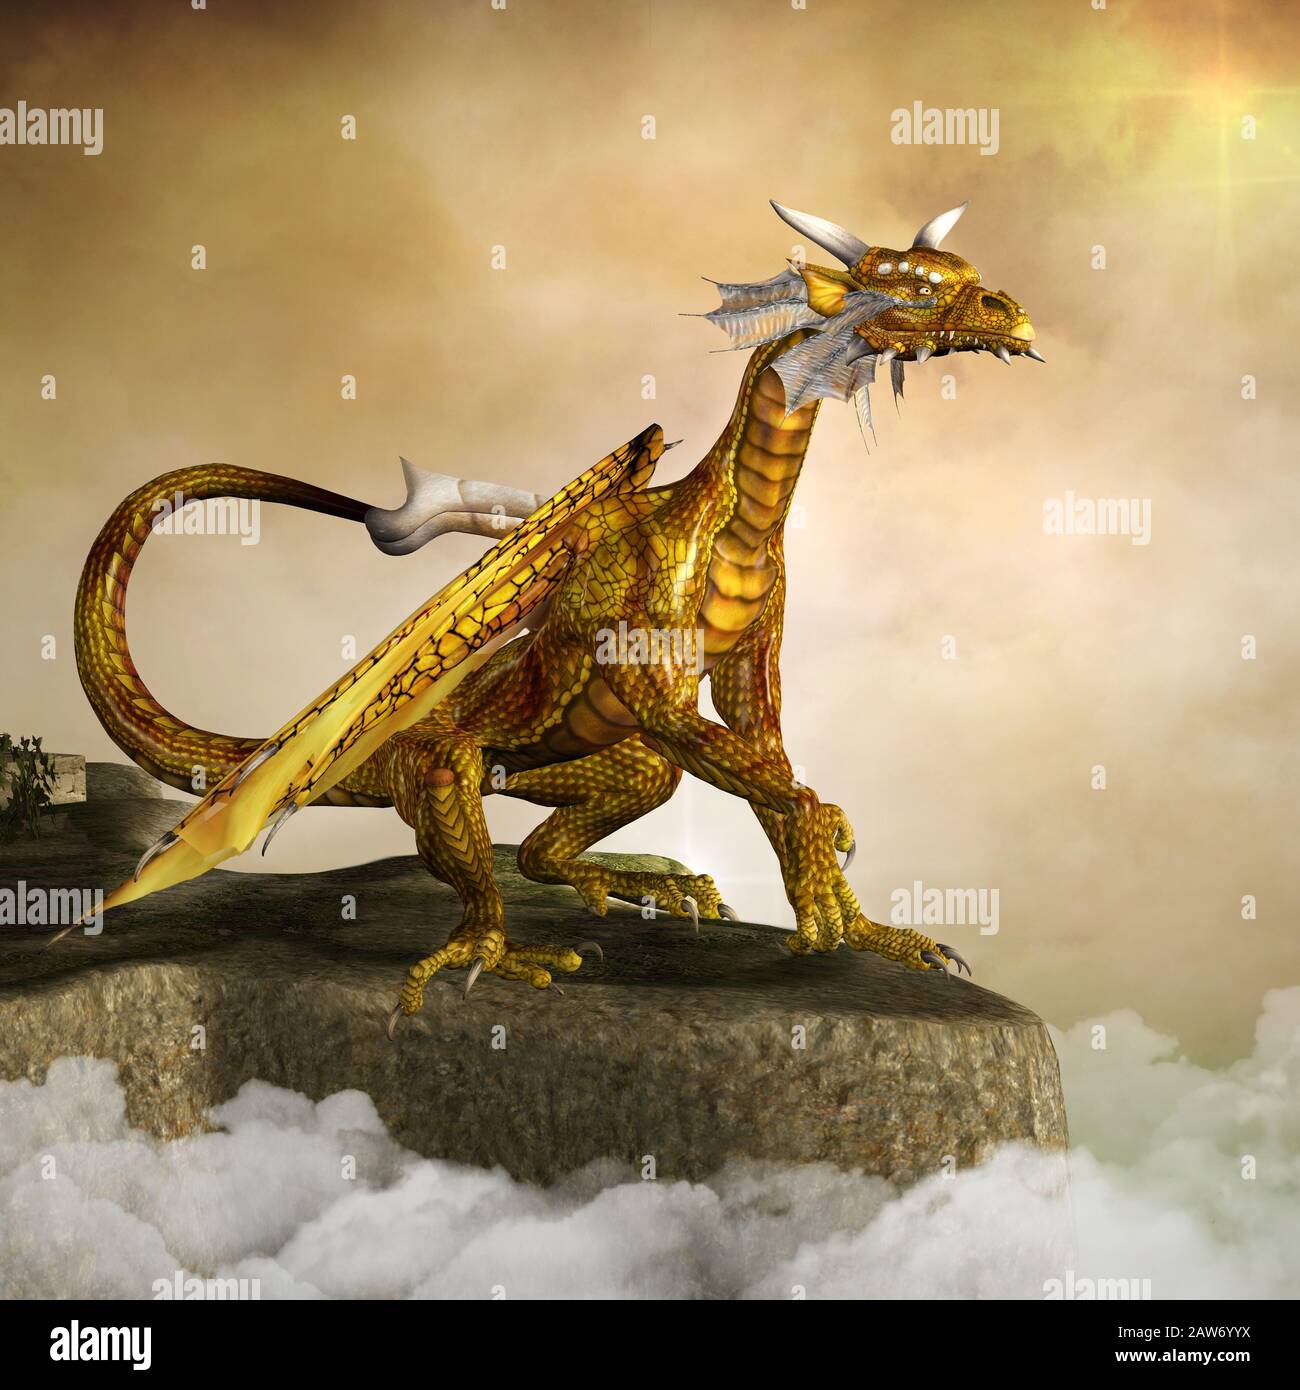 Scary golden dragon sitting on a rock Stock Photo